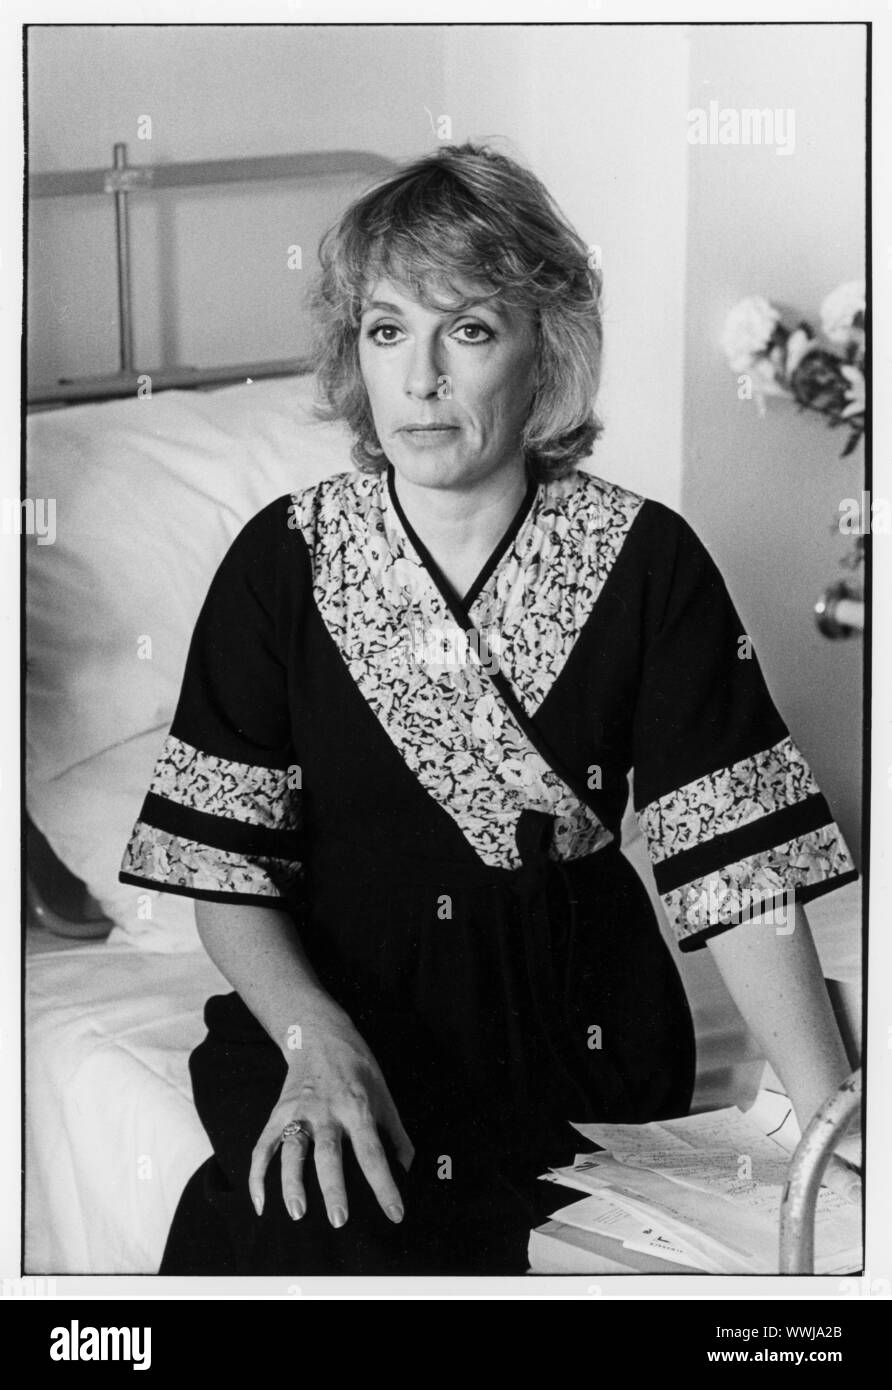 portrait of Esther Rantzen seated in hospital bed Stock Photo